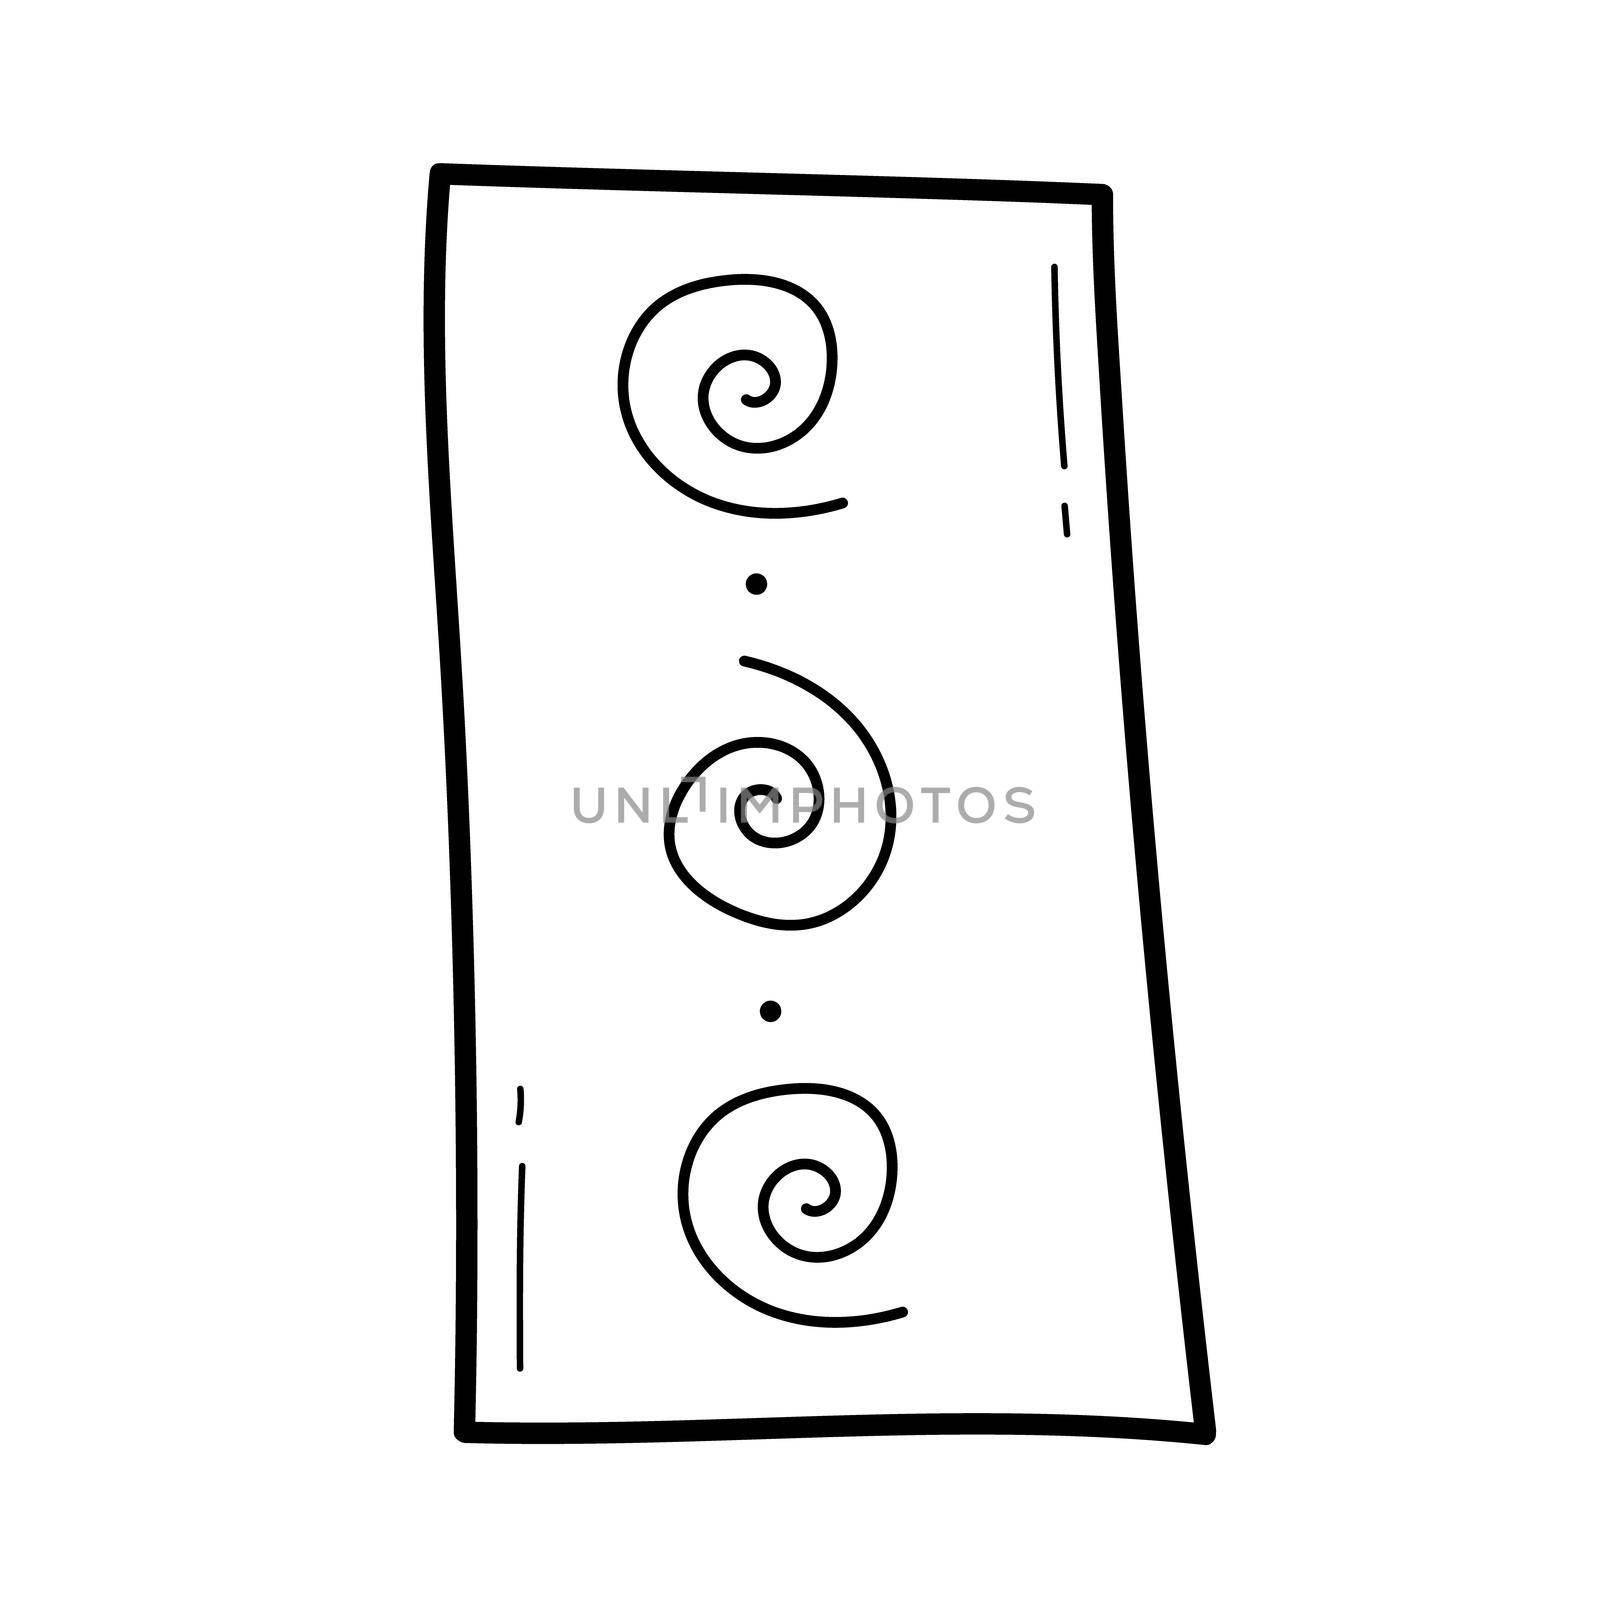 Mat for yoga. Simple vector icon in doodle style isolated on white background. Element for design. Outline drawing for coloring page.